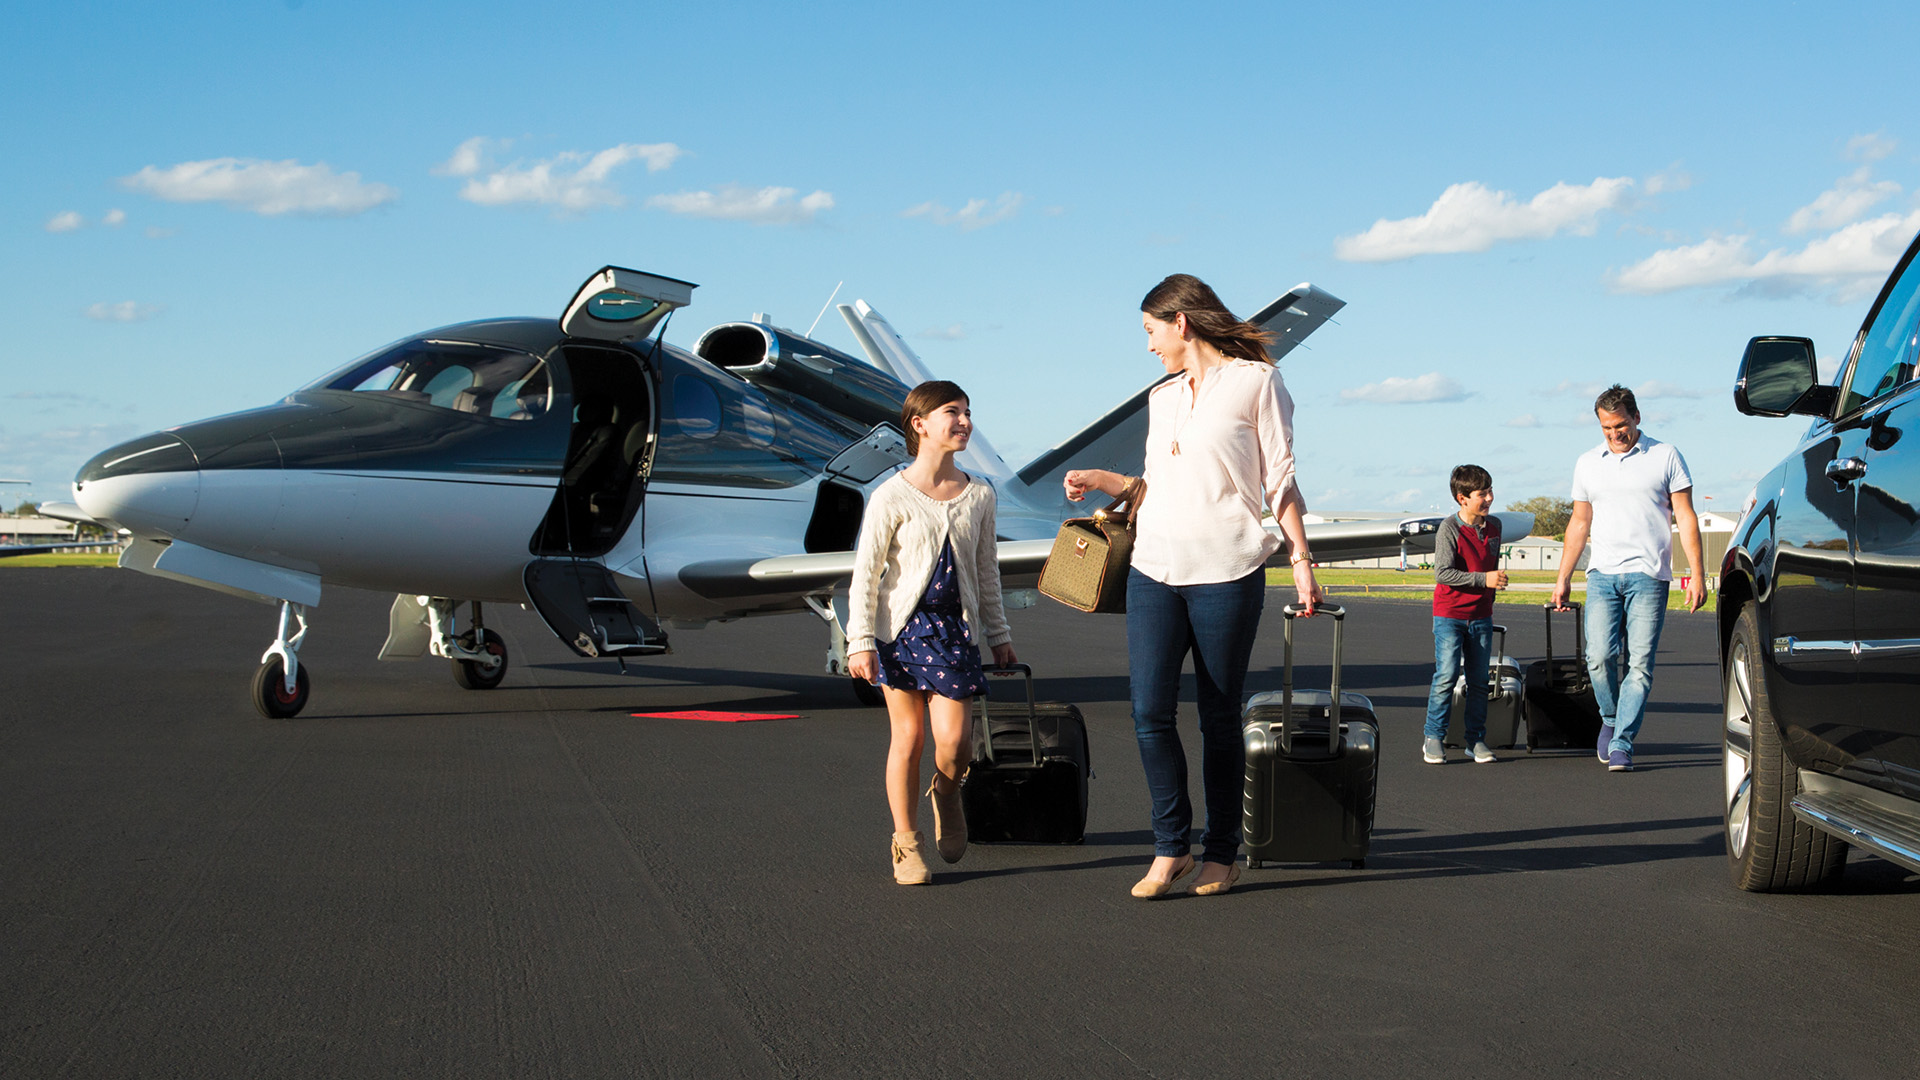 With VisionAir, Vision Jet owners can simply arrive and fly. Cirrus Aircraft will take care of the details behind the scenes to provide an exceptional travel experience – from preparing the aircraft to rolling out the red carpet and stocking the owner’s favorite refreshments onboard.